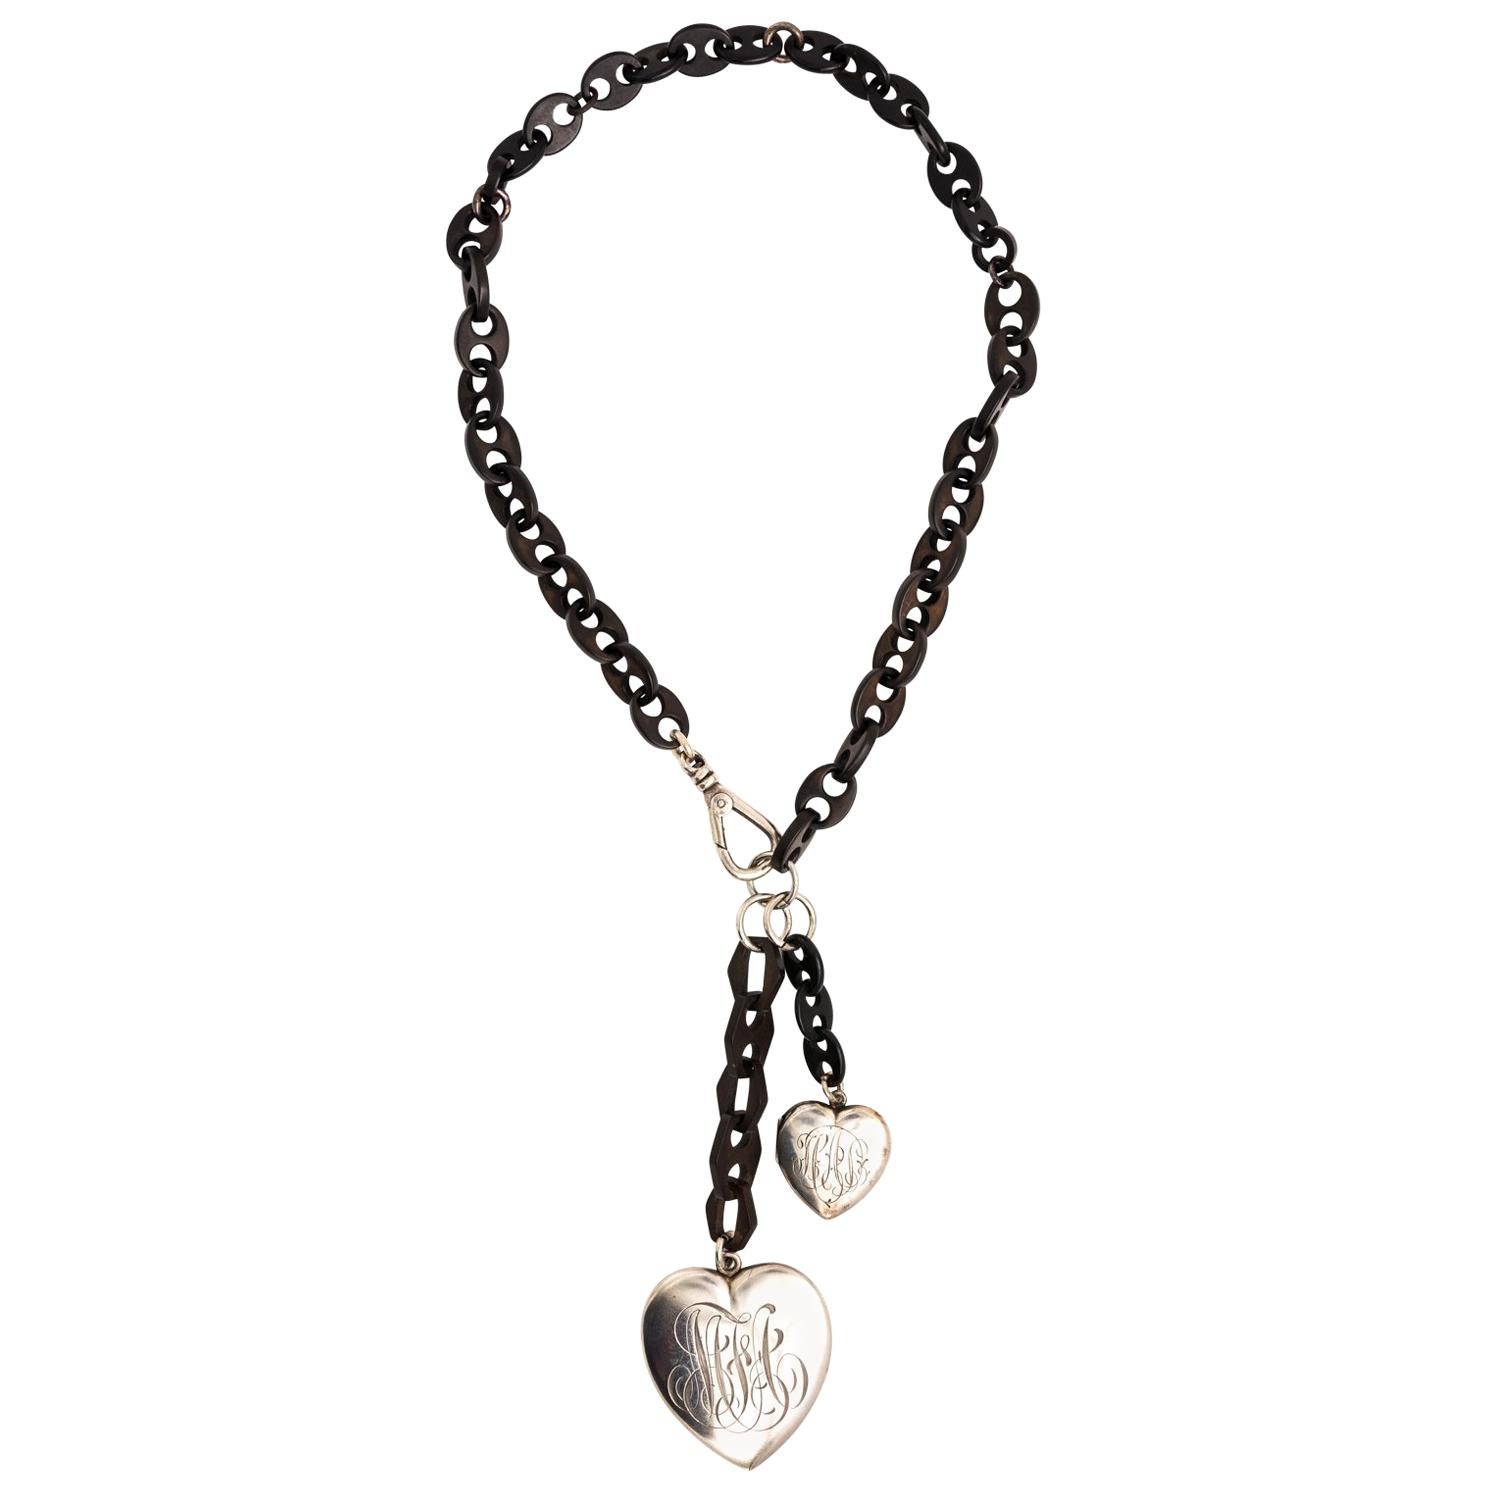 Gutta Percha and Sterling Silver Charm Heart Necklace